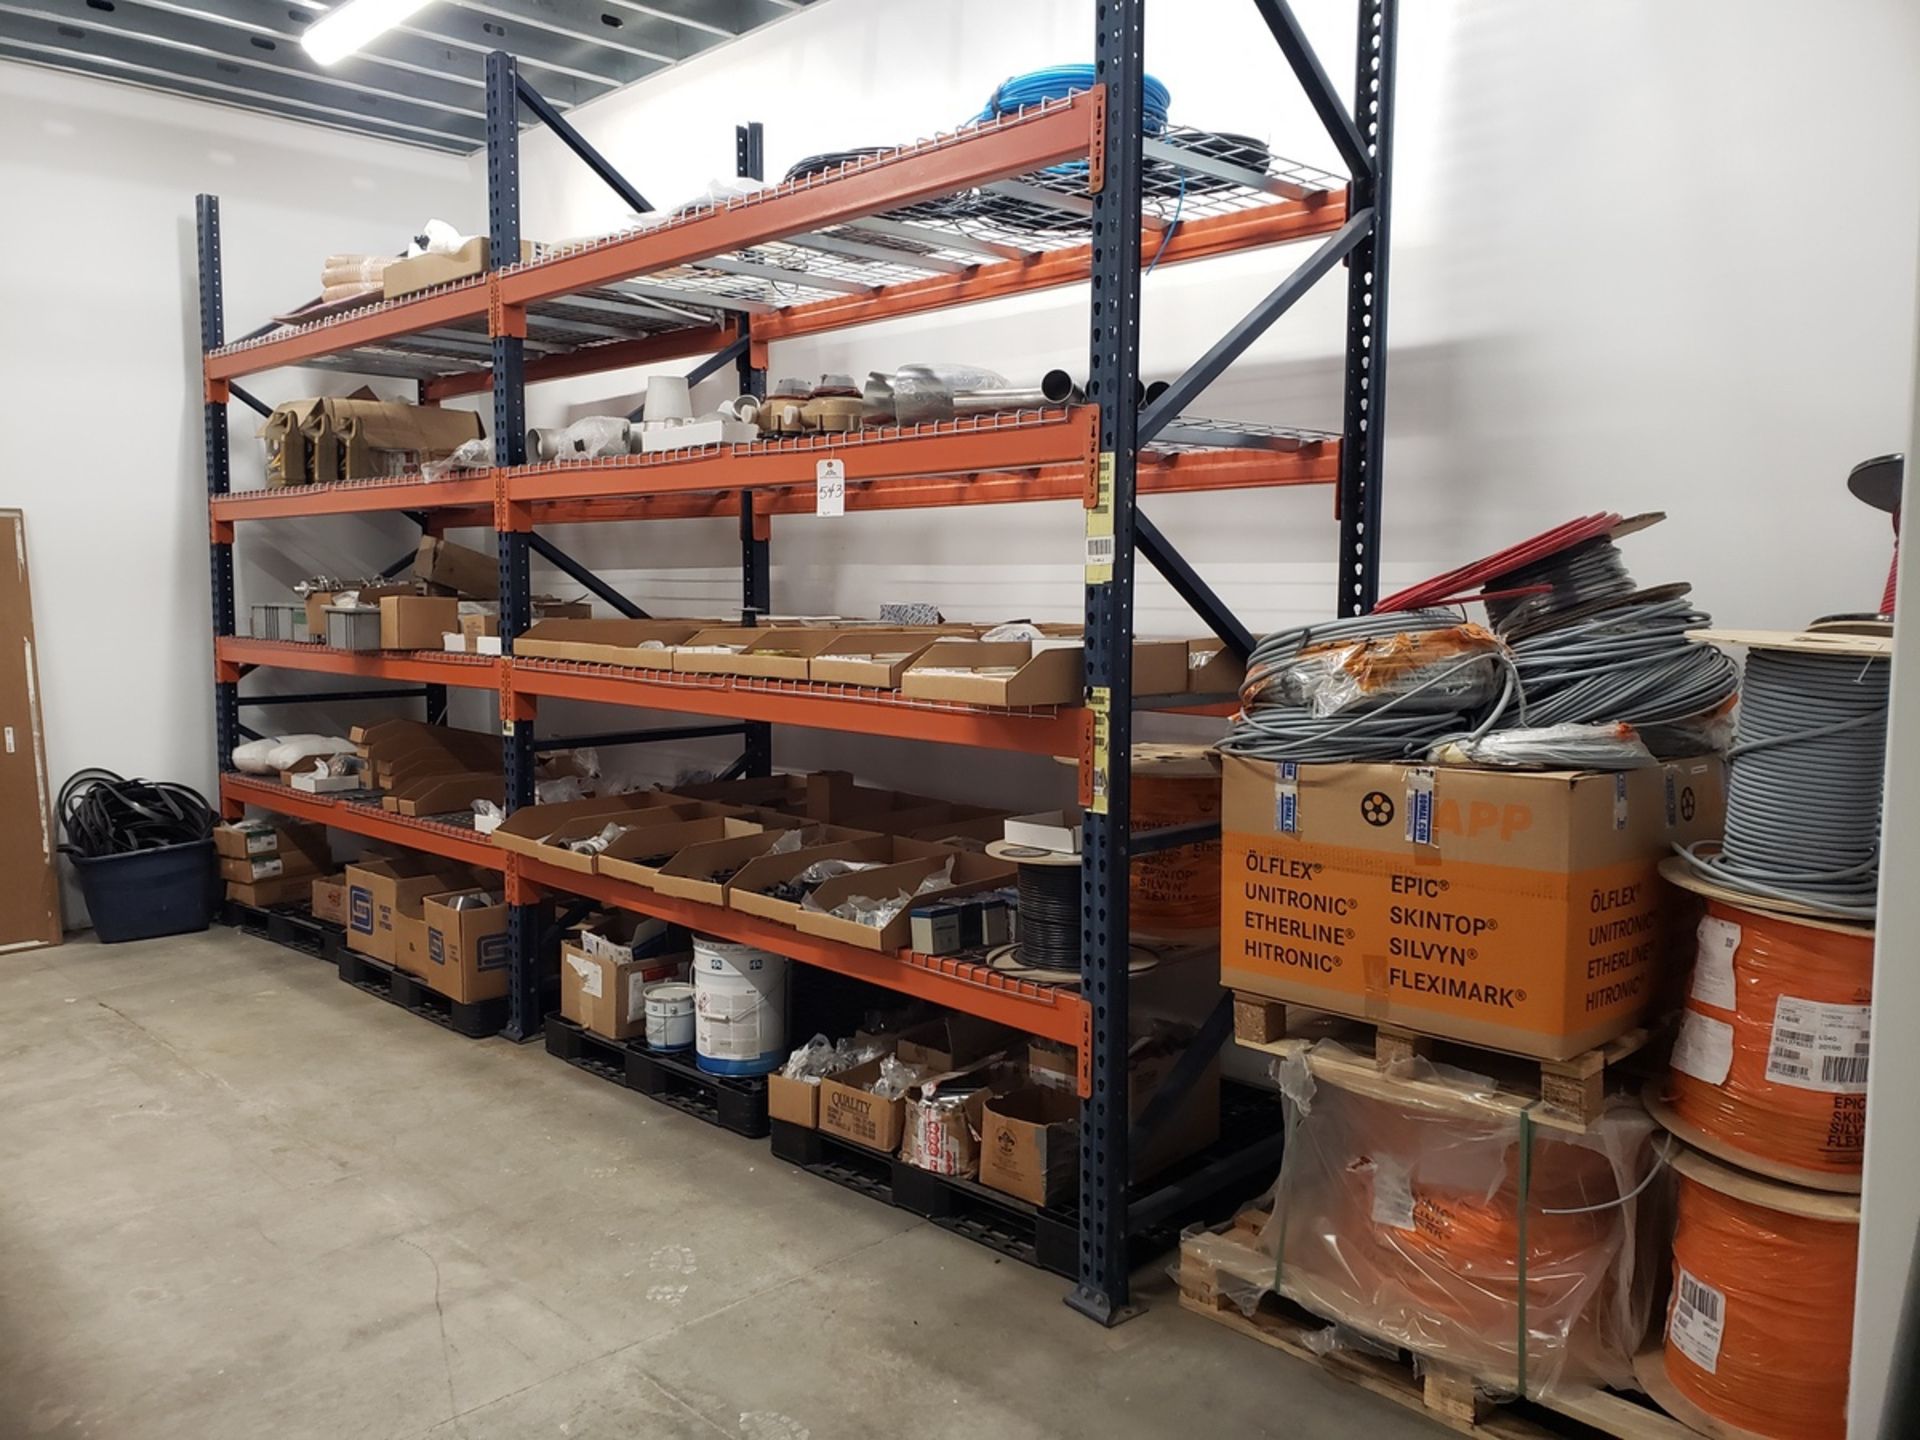 BULK BID - Lots 544-557, Contents of Spare Parts Storage Shel - Subj to Piecemeal | Rig Fee See Desc